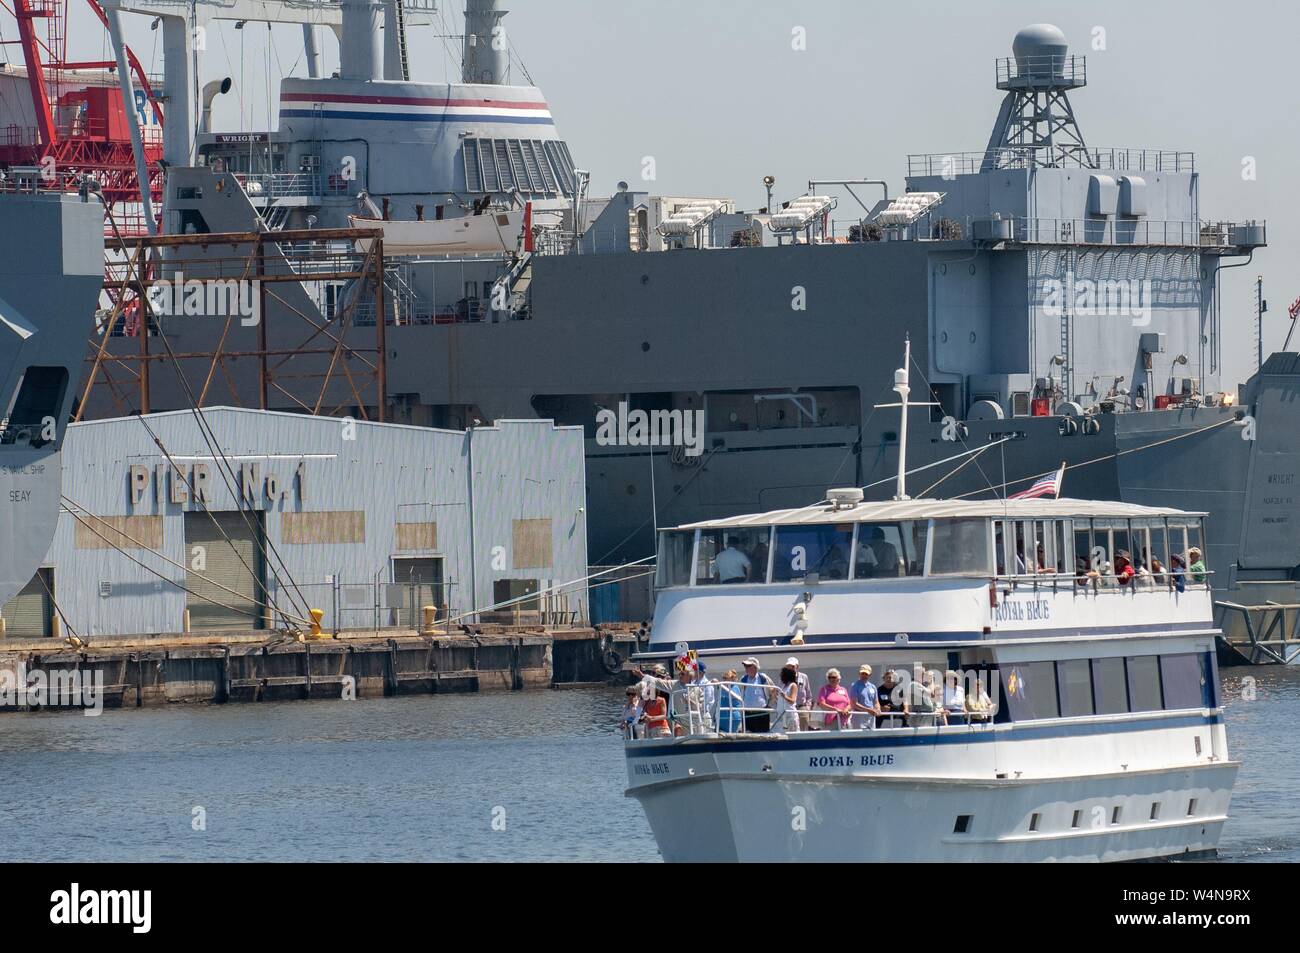 Bow and port view of the Royal Blue, a tourist boat, cruising past Pier No 1 with a large military ship in the background, Baltimore, Maryland, May 4, 2006. From the Homewood Photography Collection. () Stock Photo